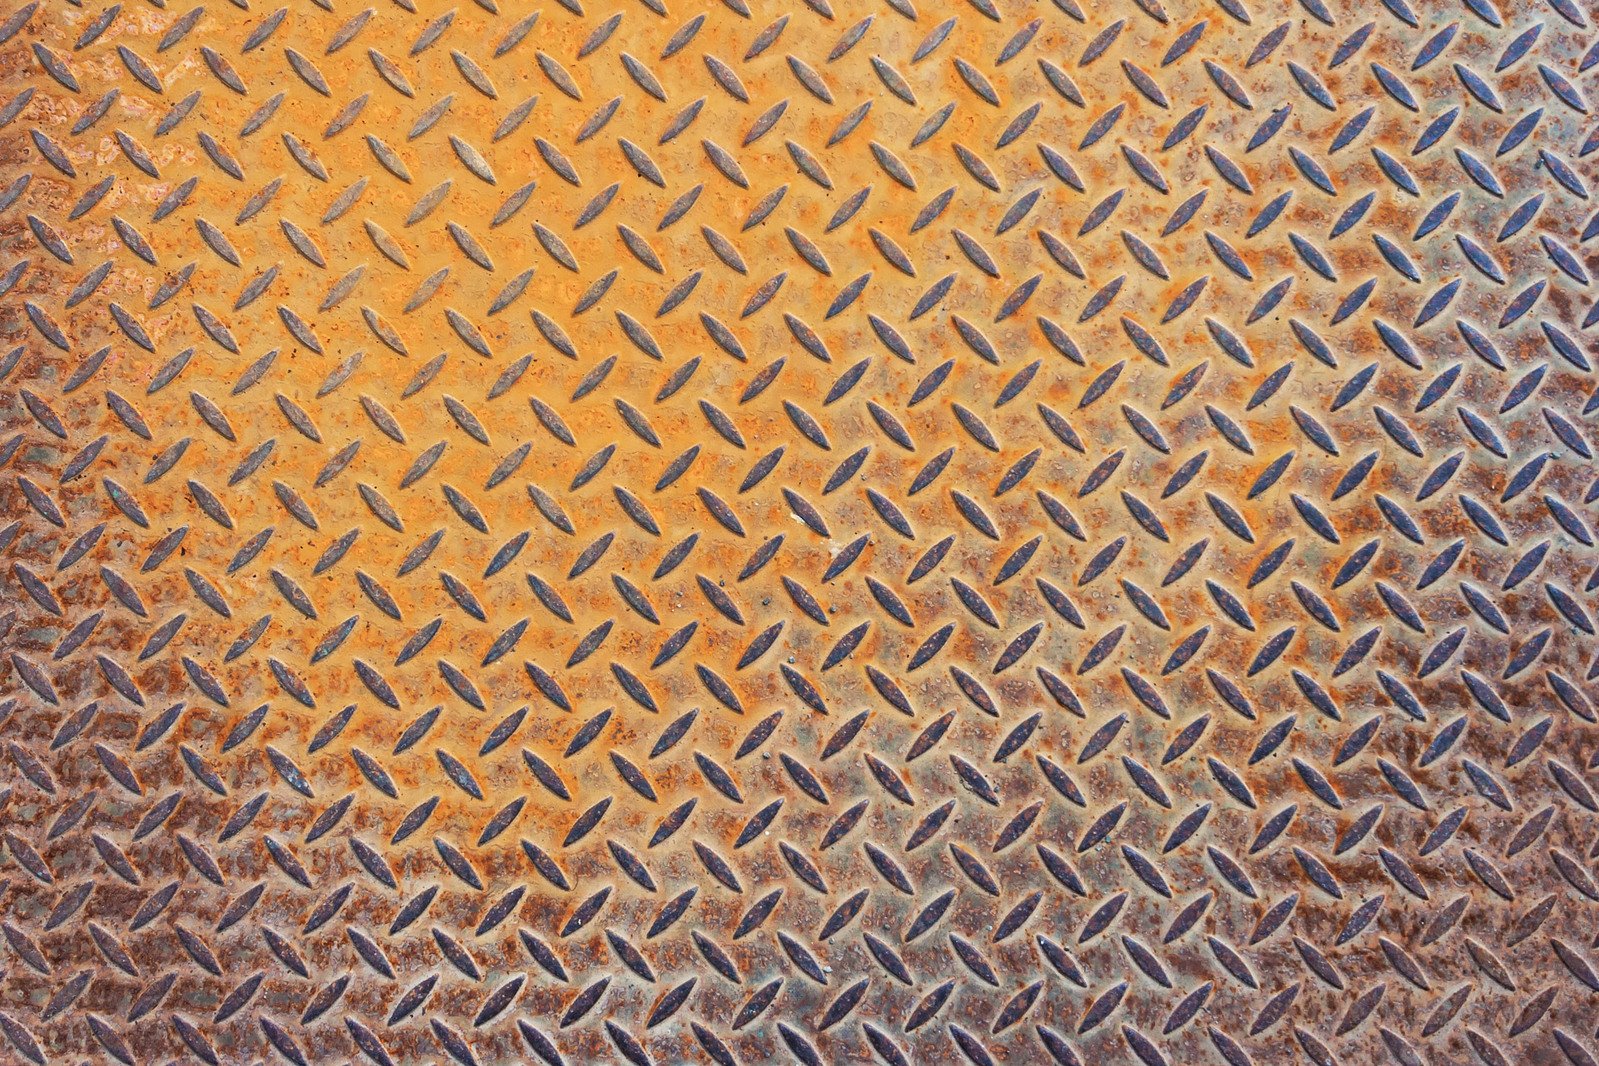 diamond plate background from the ceiling showing it is gold